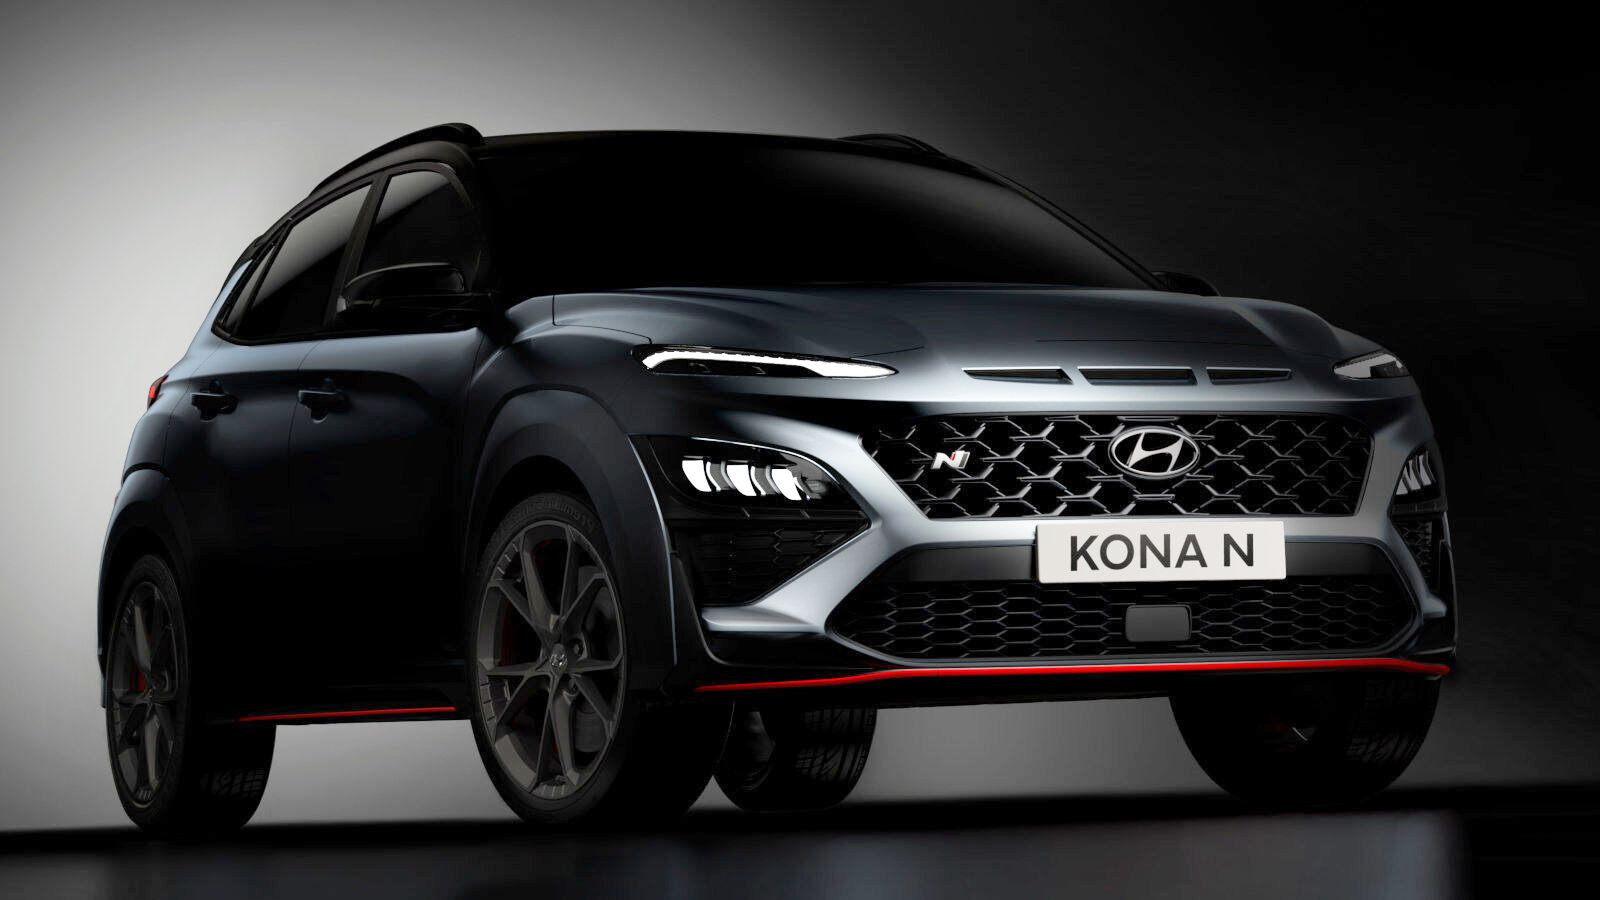  Hyundai Kona N to get 280 hp, 2.0-litre turbo-petrol with eight-speed DCT automatic